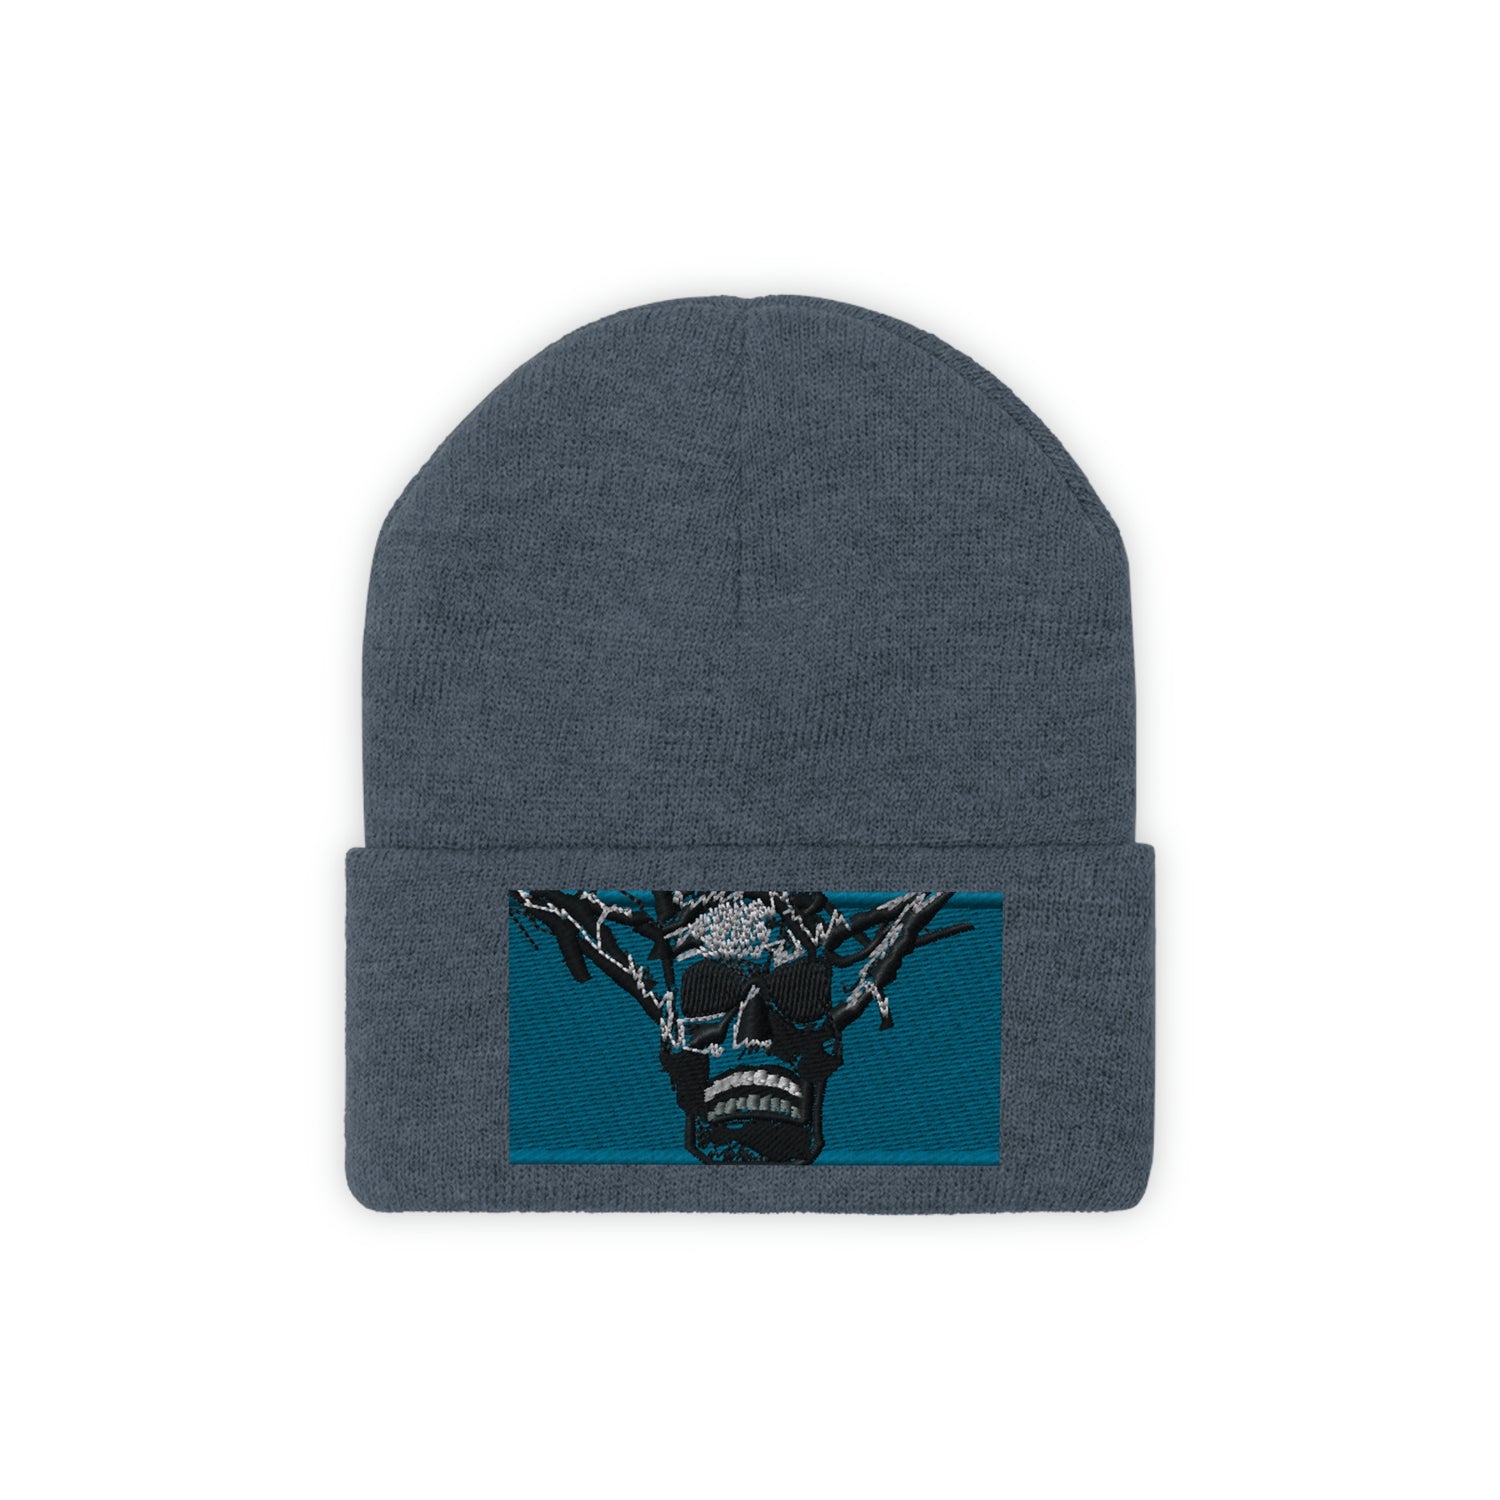 Skull Warrior Stare (color) - Unisex Knit Beanie - Fry1Productions